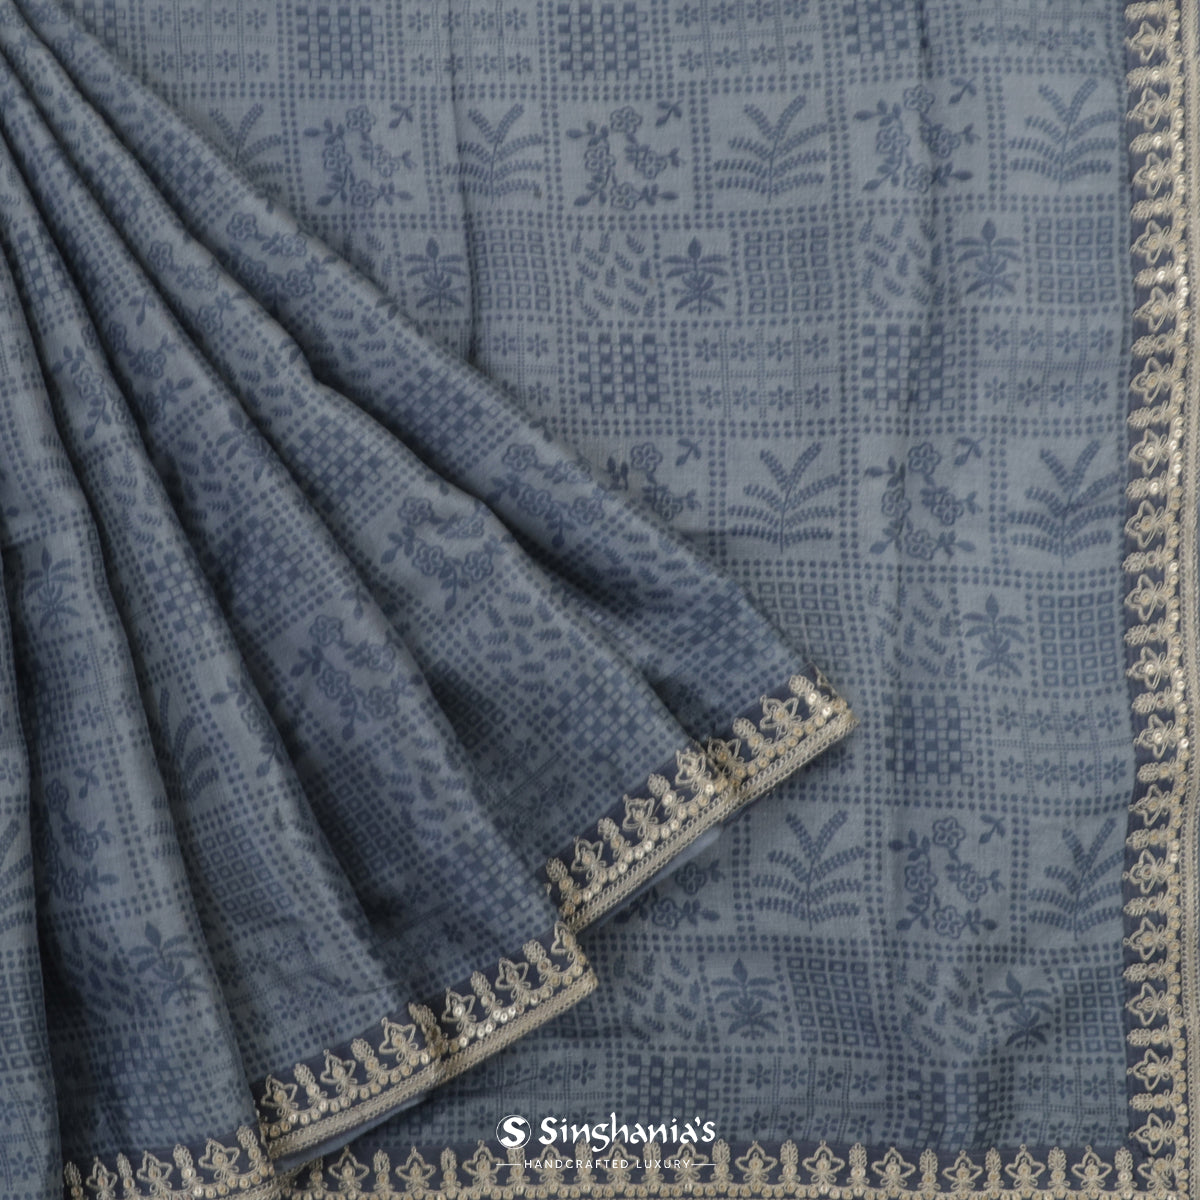 Oxford Gray Tussar Silk Saree With Printed Floral-Leaves Pattern